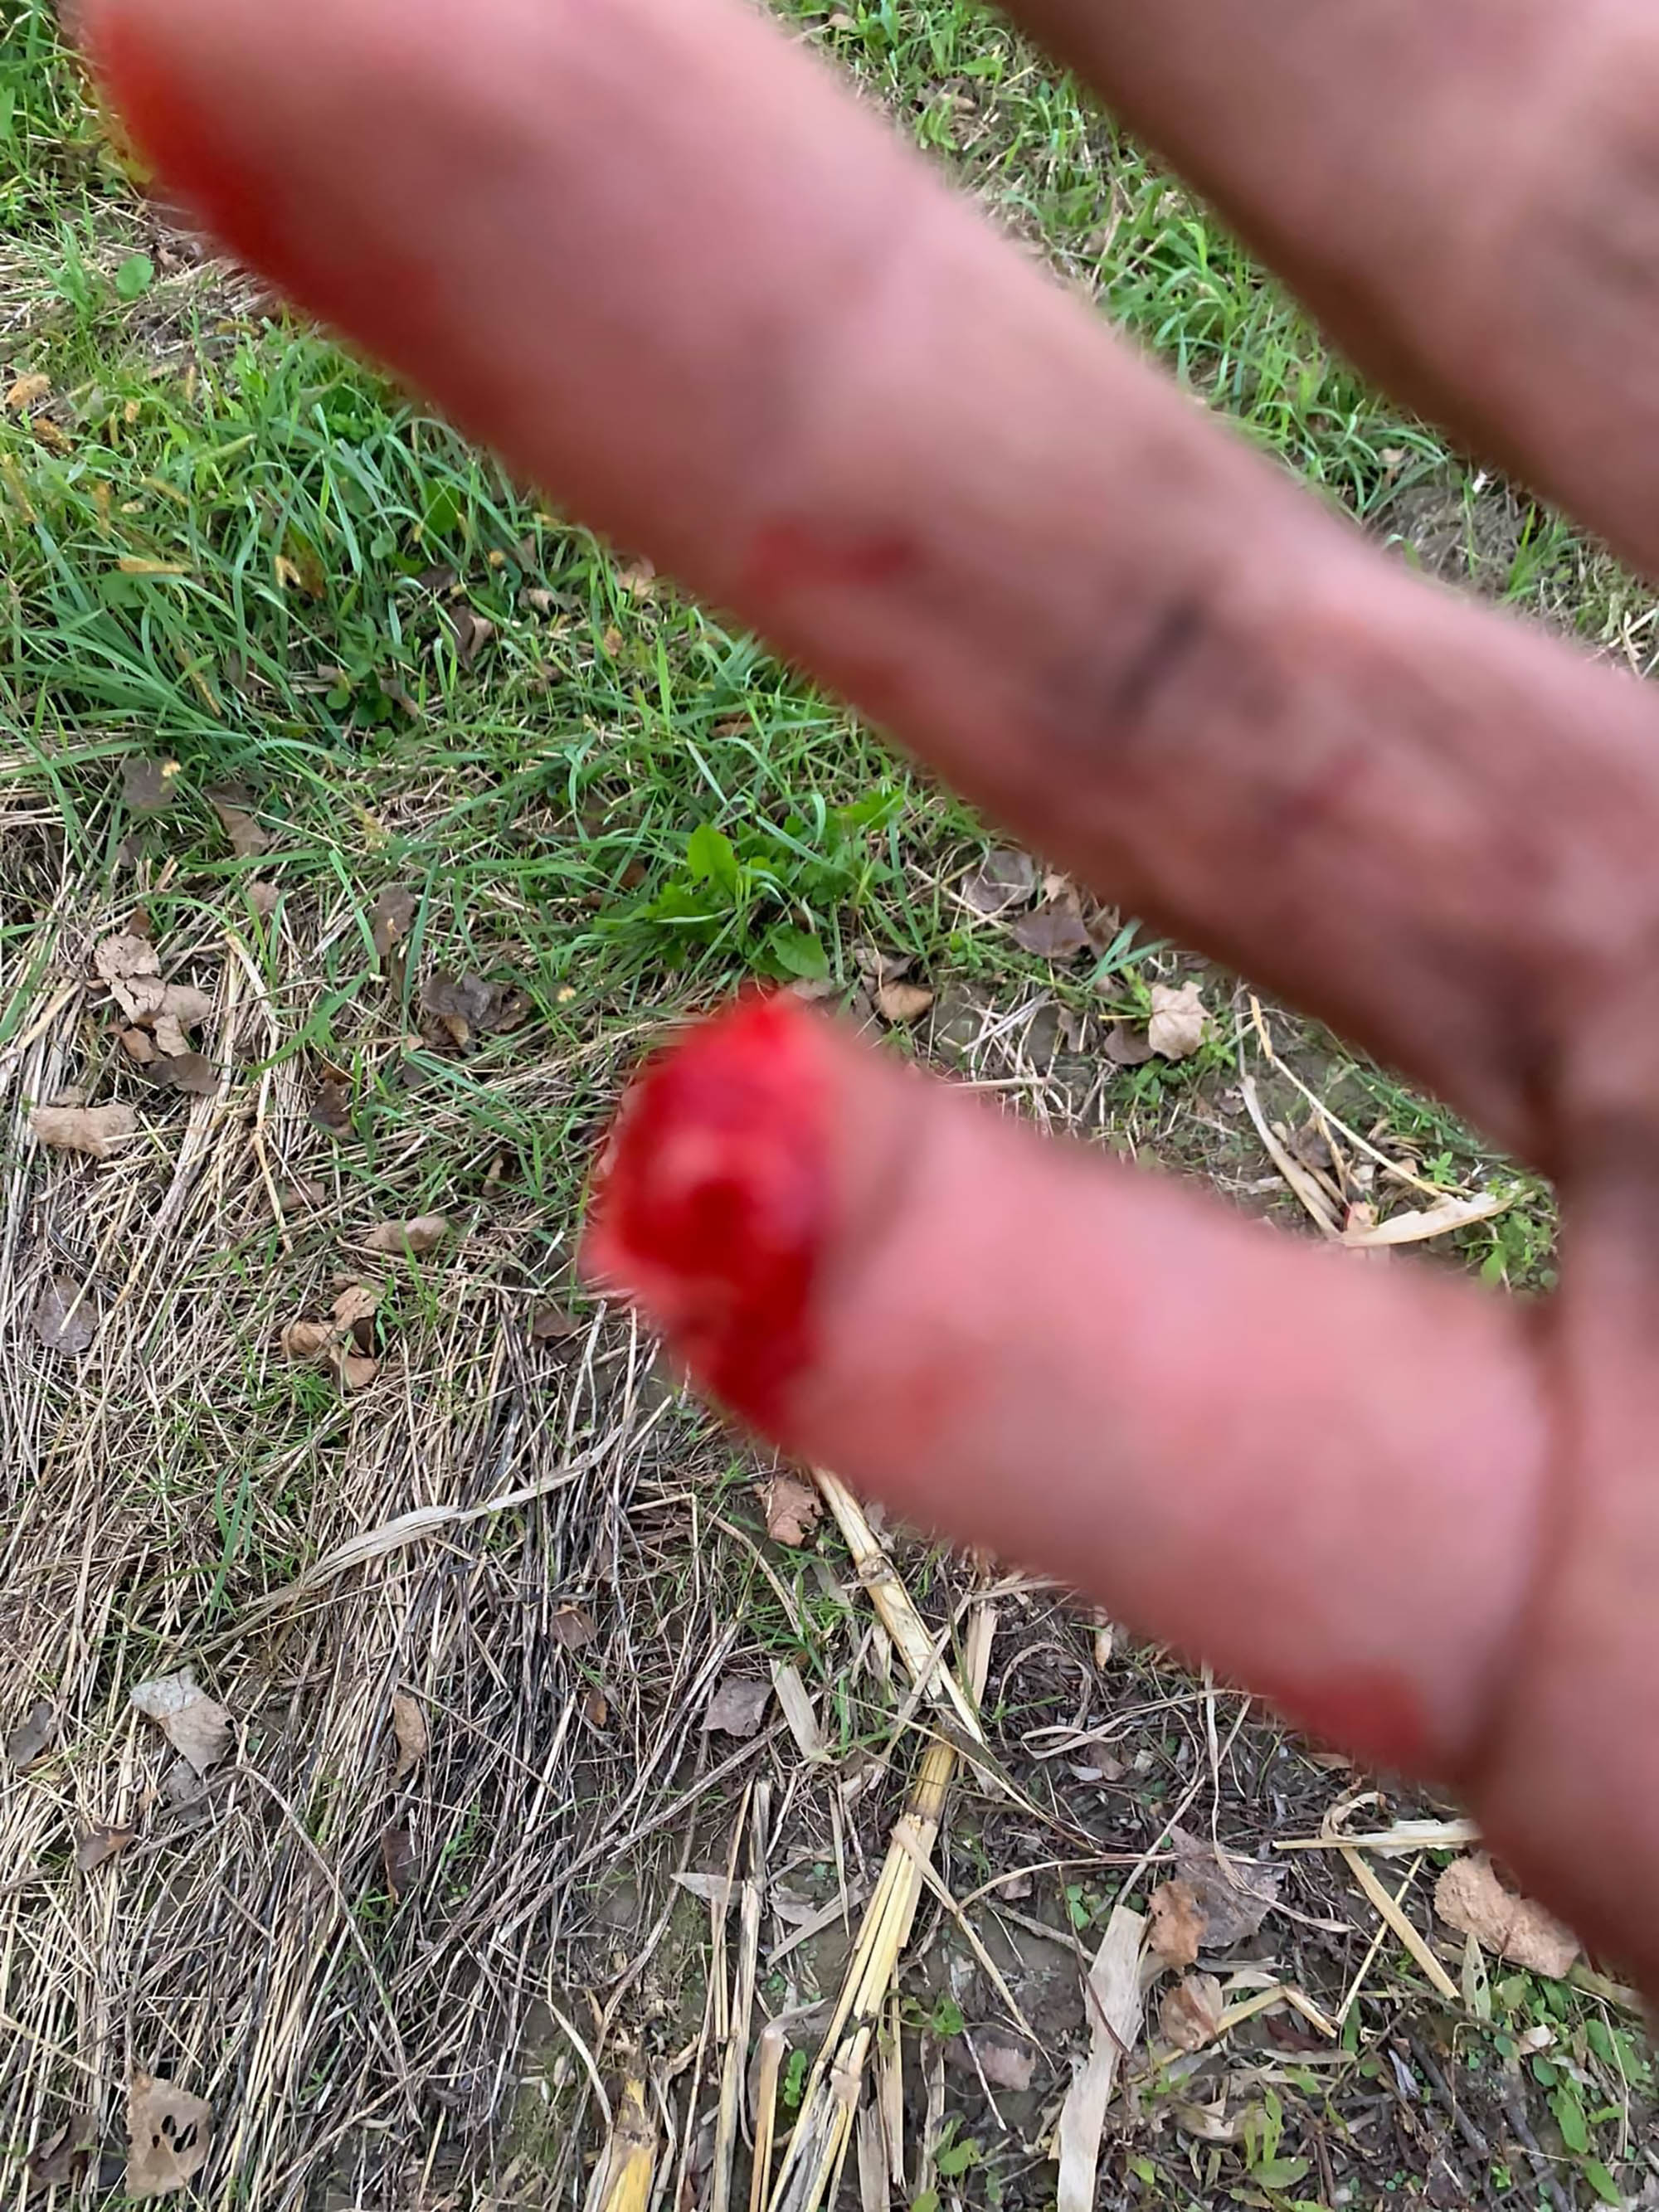 Read more about the article MMA Fighter Has Finger Torn Off In Farming Accident